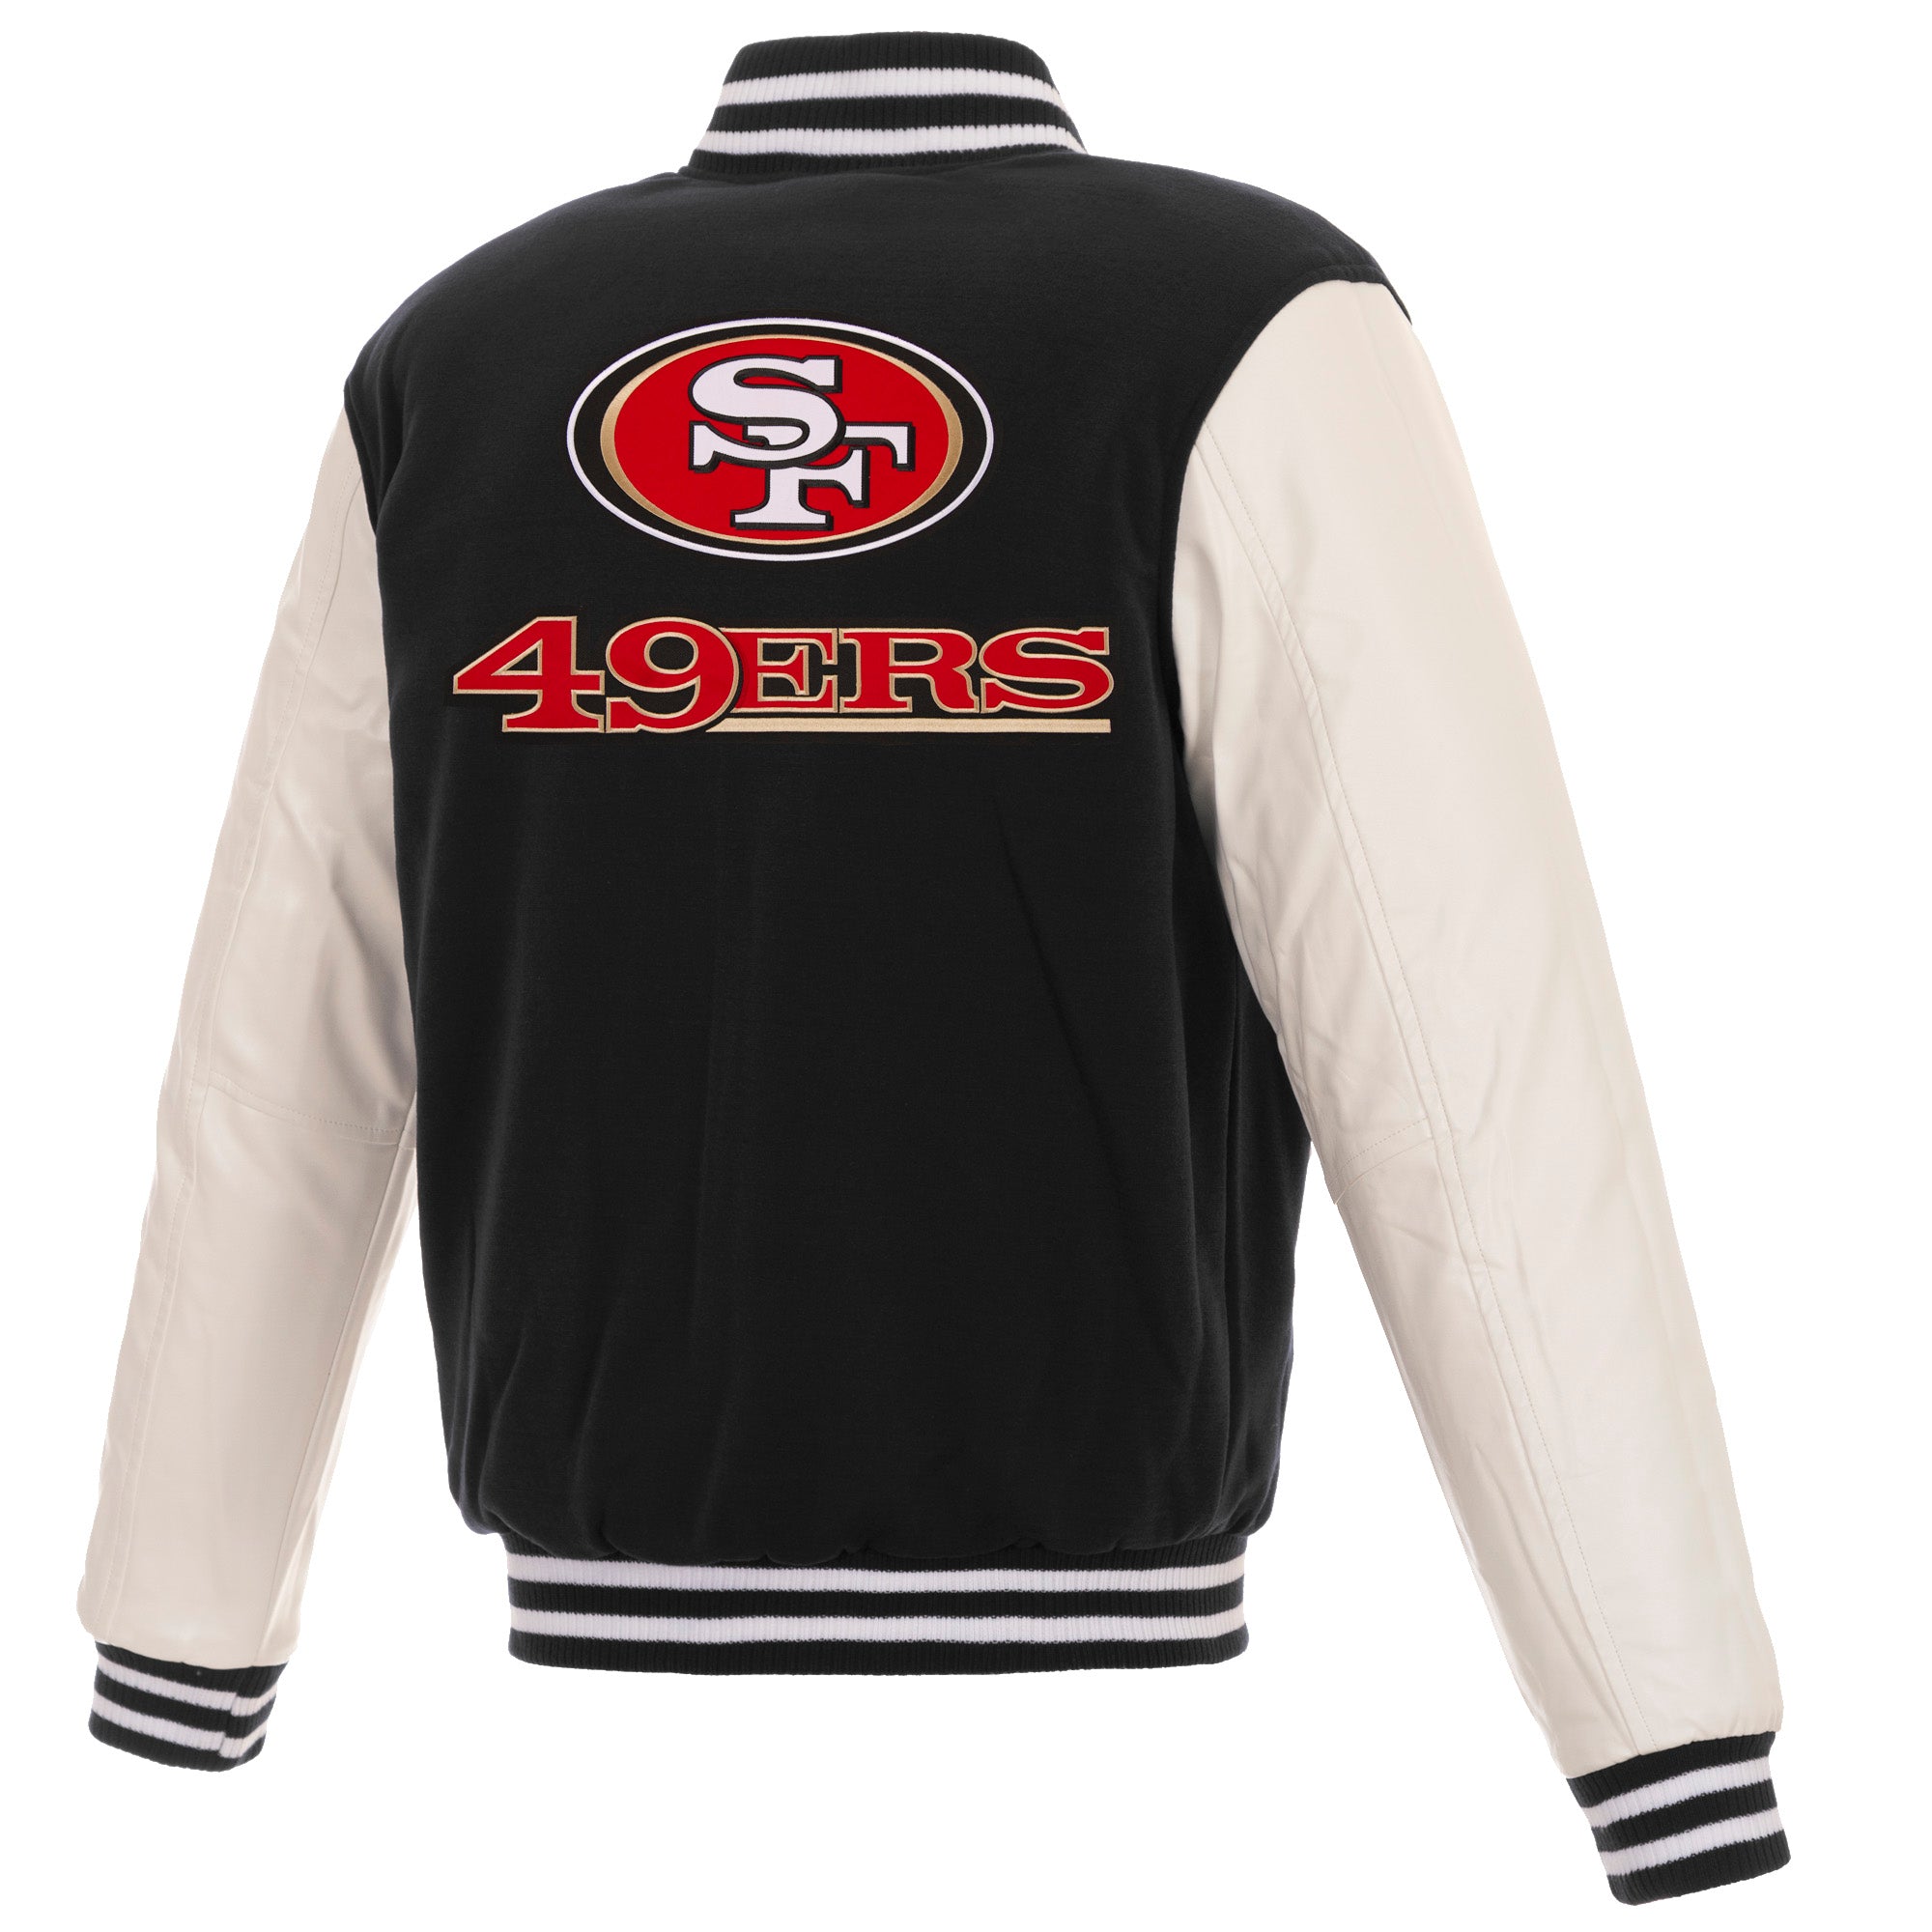 San Francisco 49ers - JH Design Reversible Fleece Jacket with Faux Leather Sleeves - Black/White 3X-Large